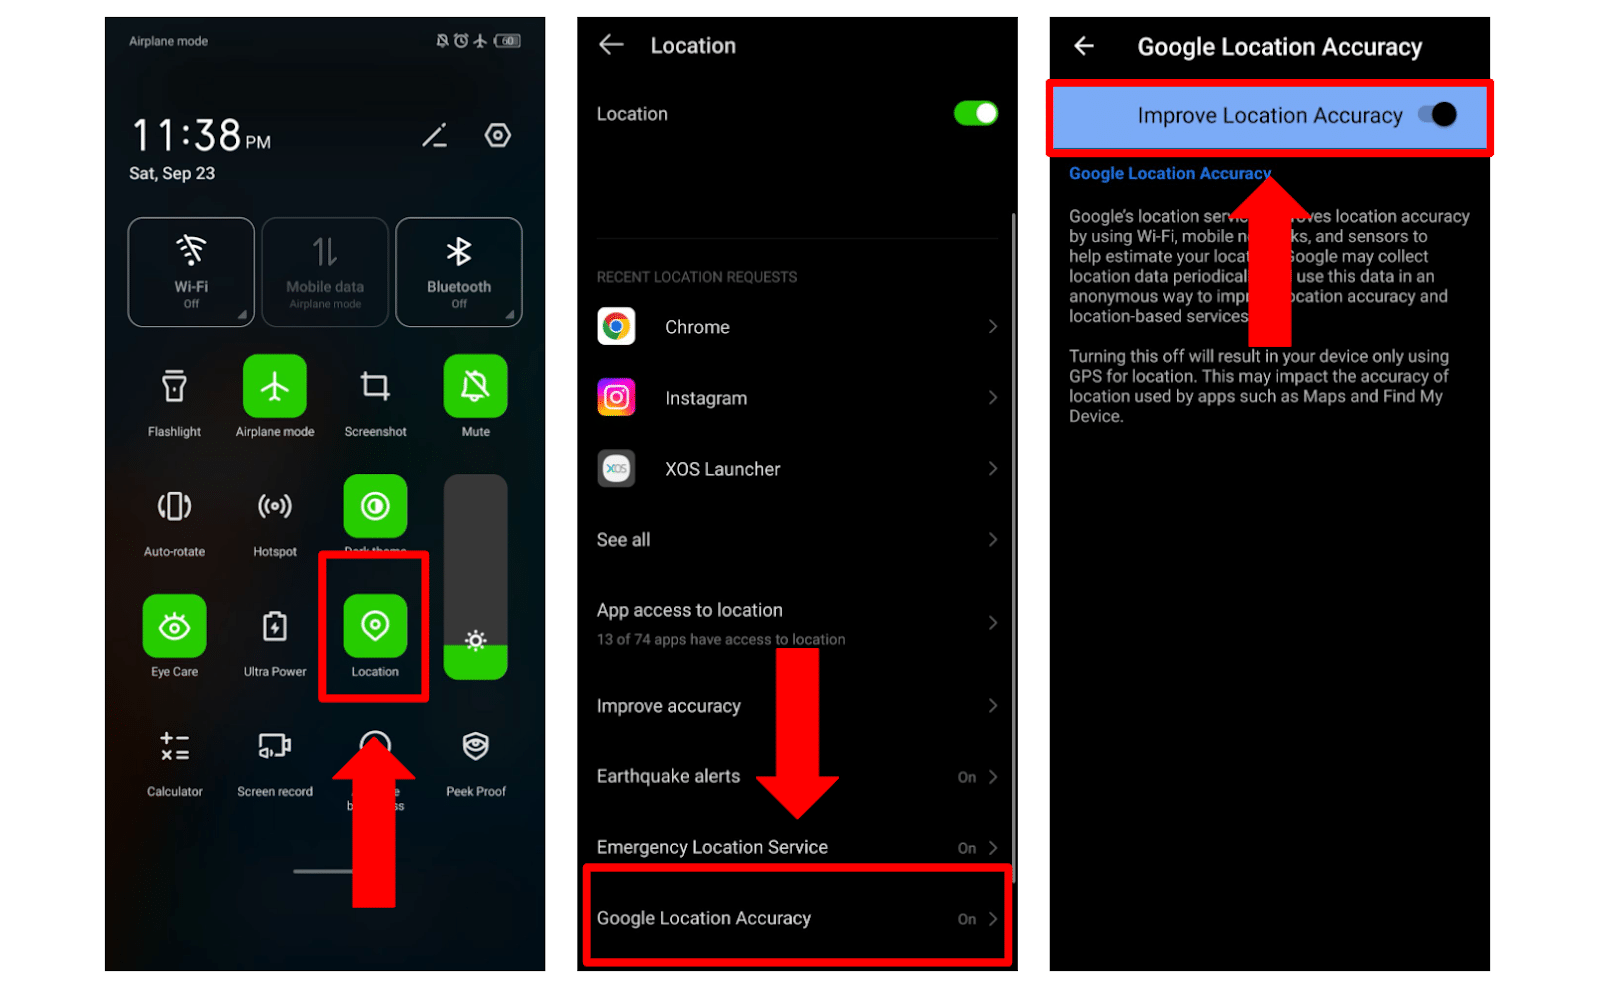 Navigating An Android Device to Adjust Location Accuracy